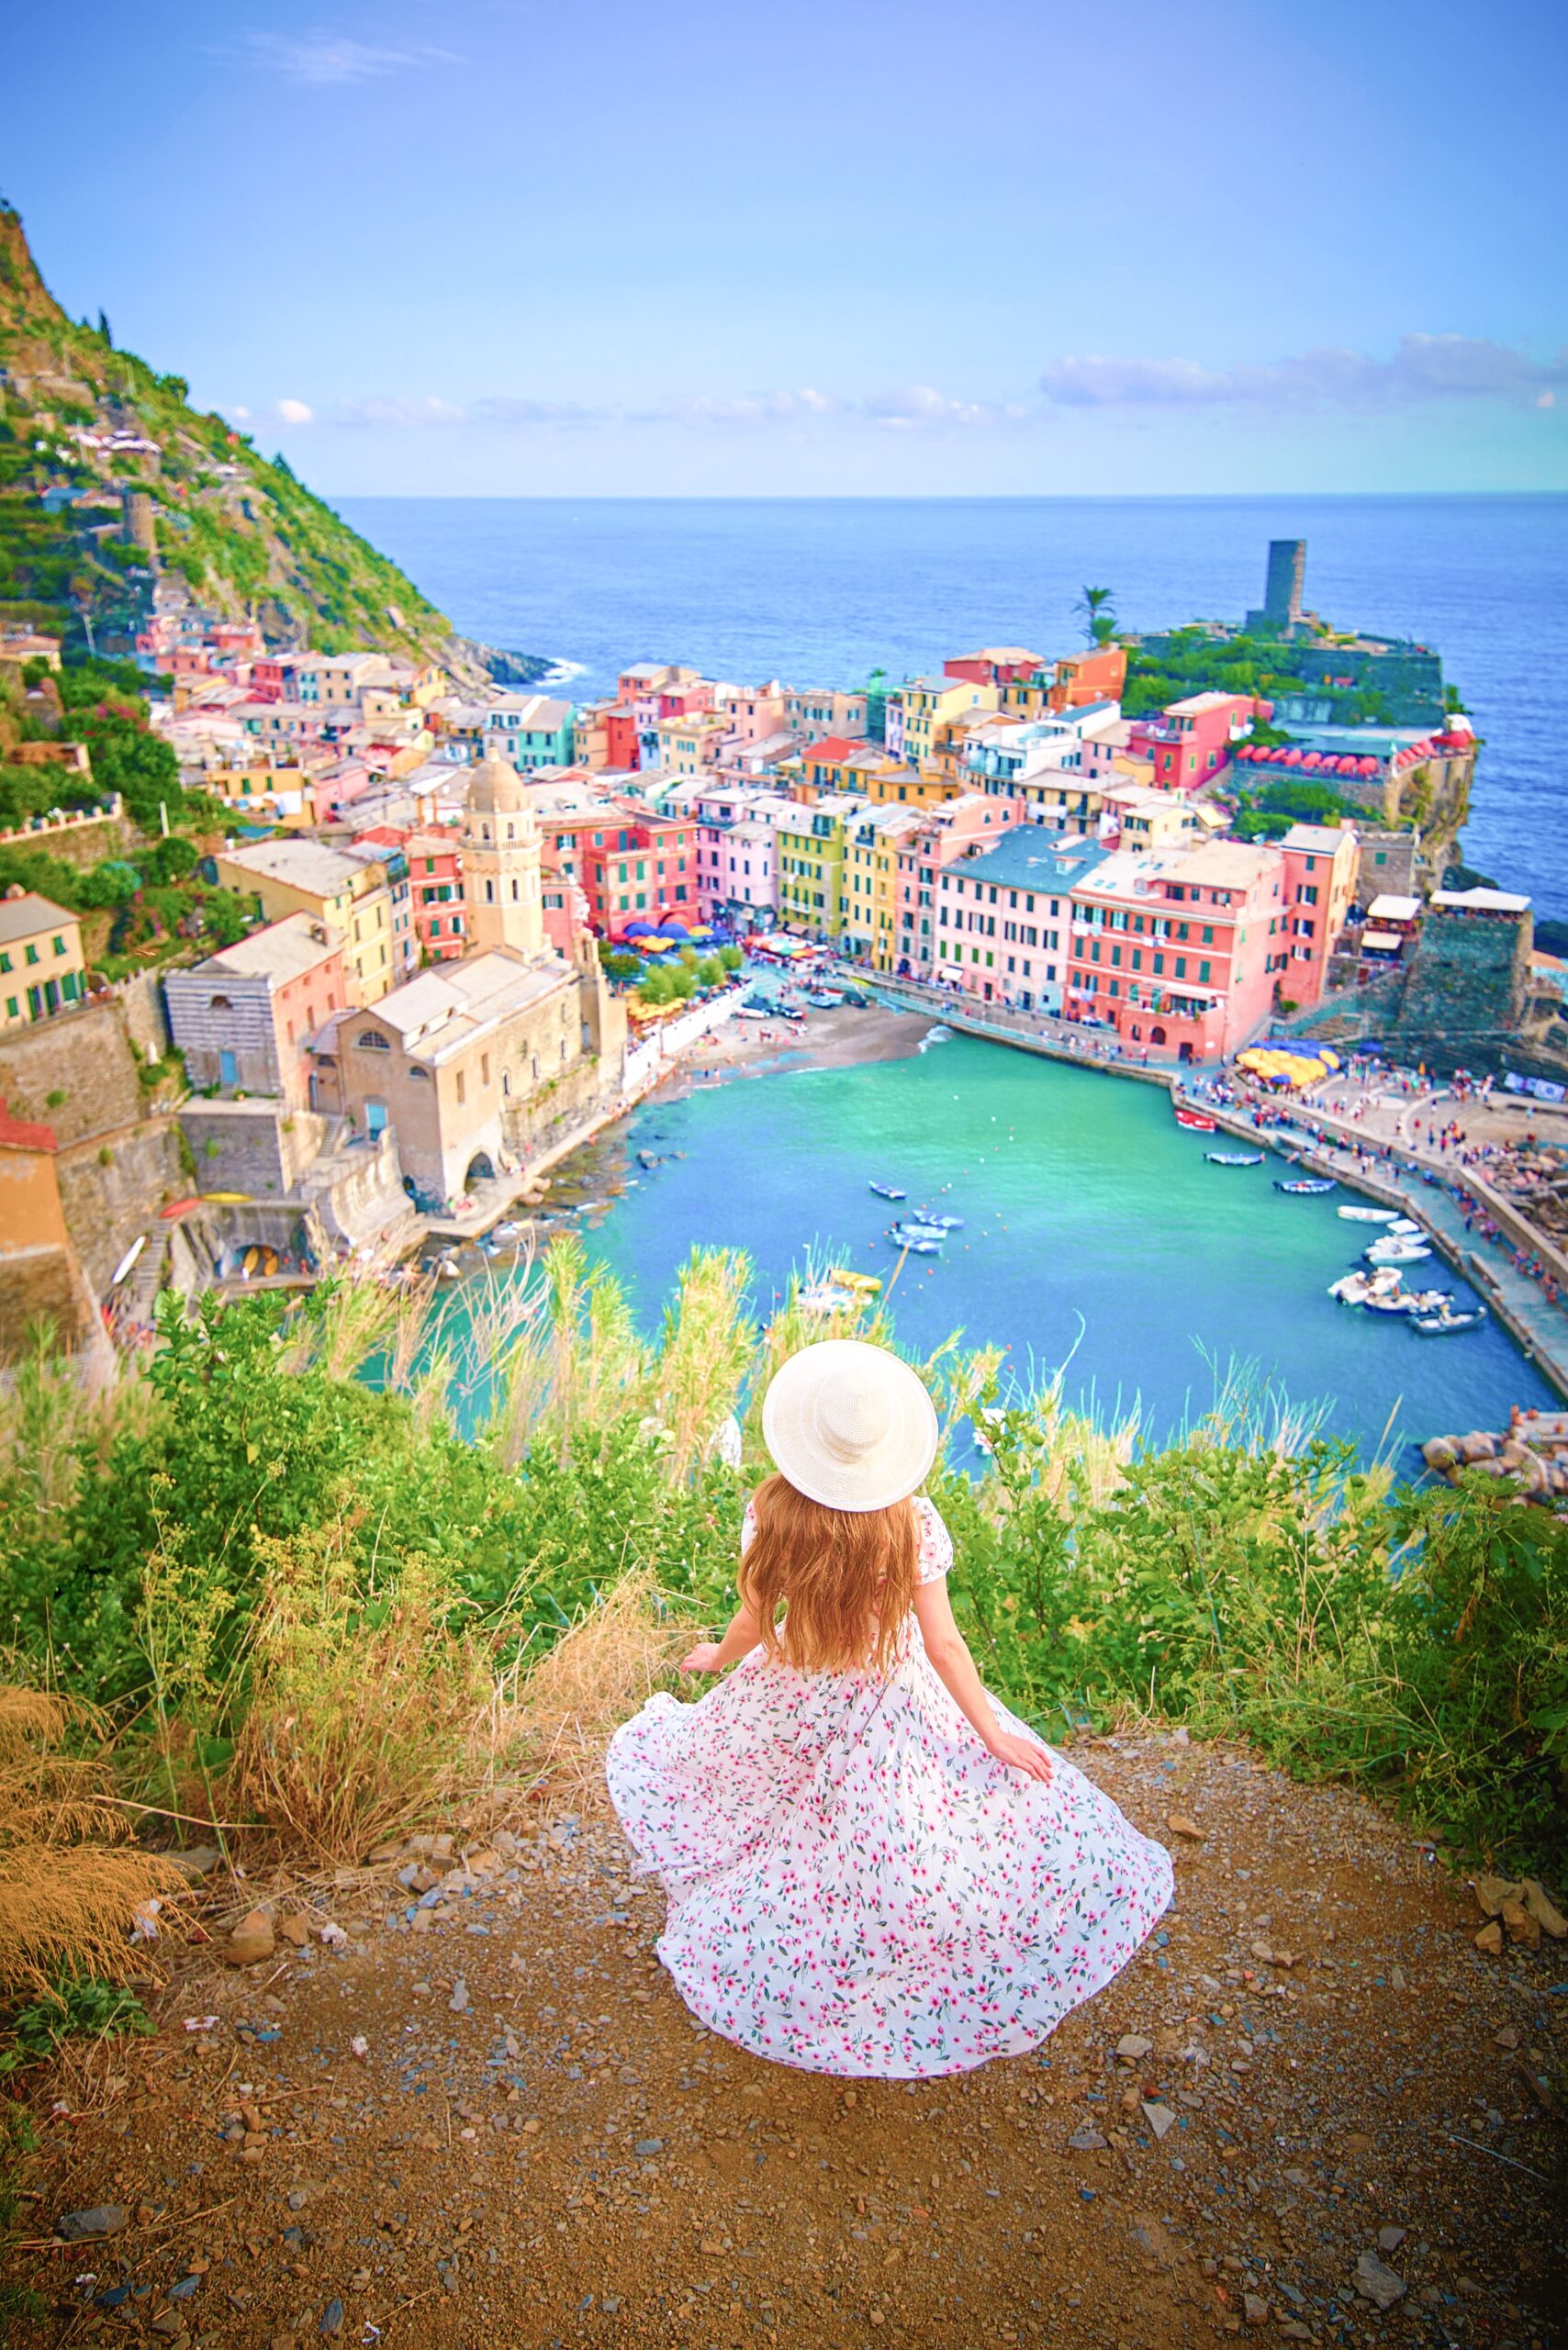 Woman in flowery dress in Cinque Terre overlooking the harbor and town.